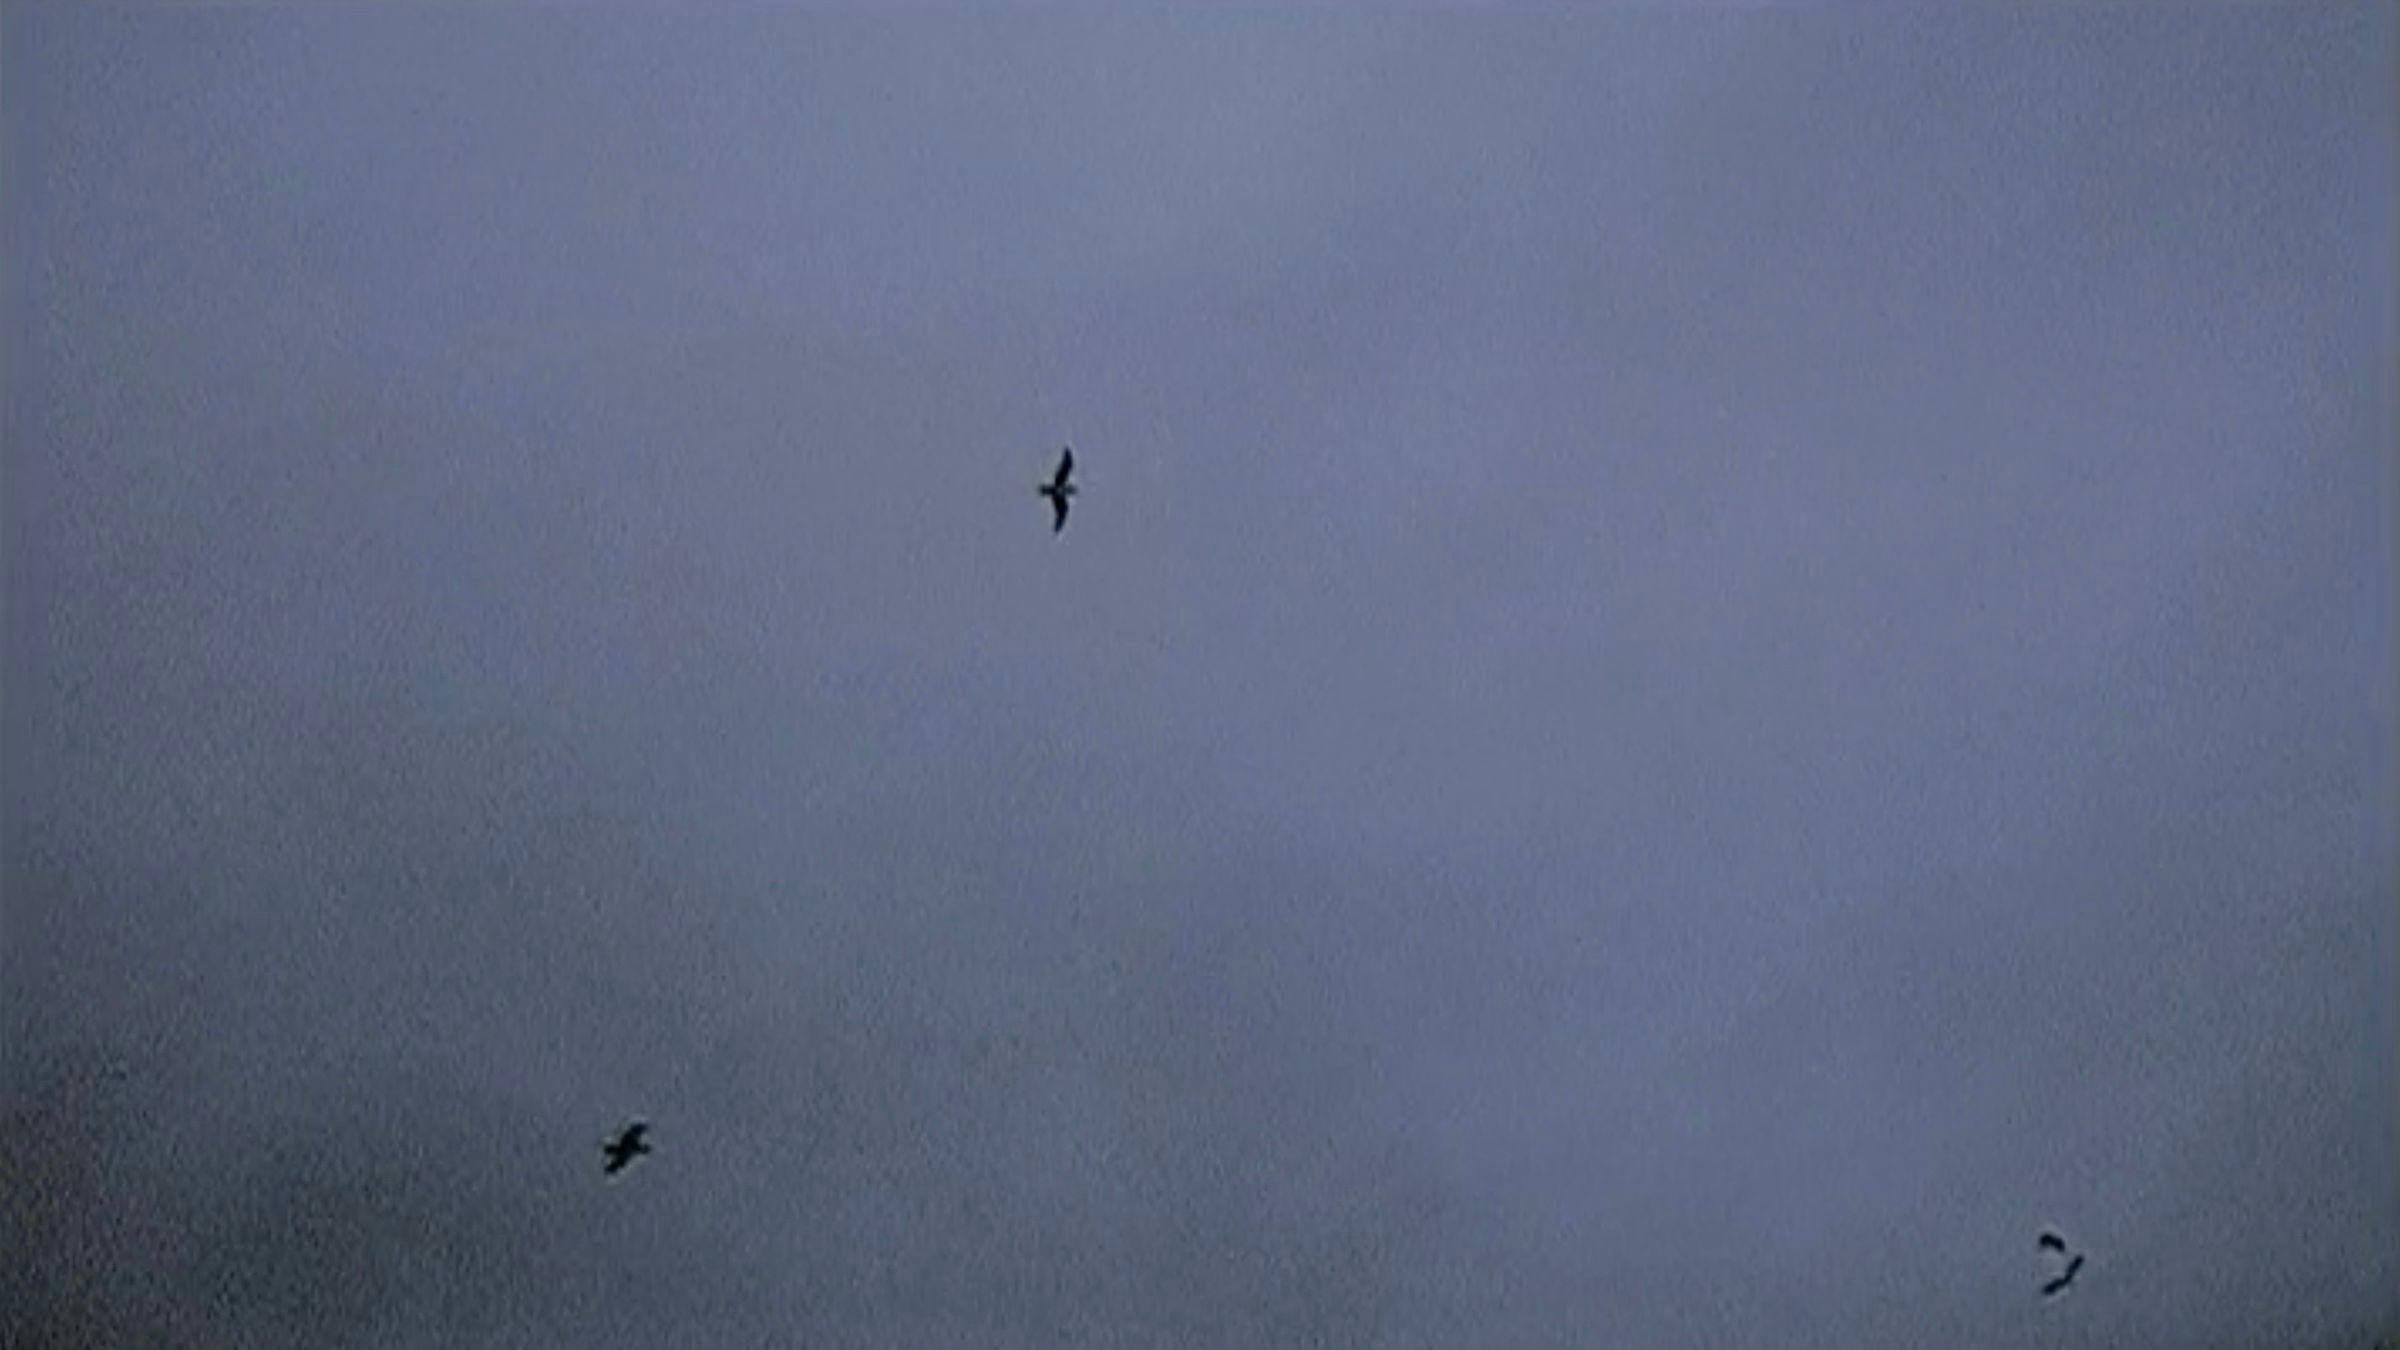 Small silhouettes of birds are cast against a light, cloudy sky